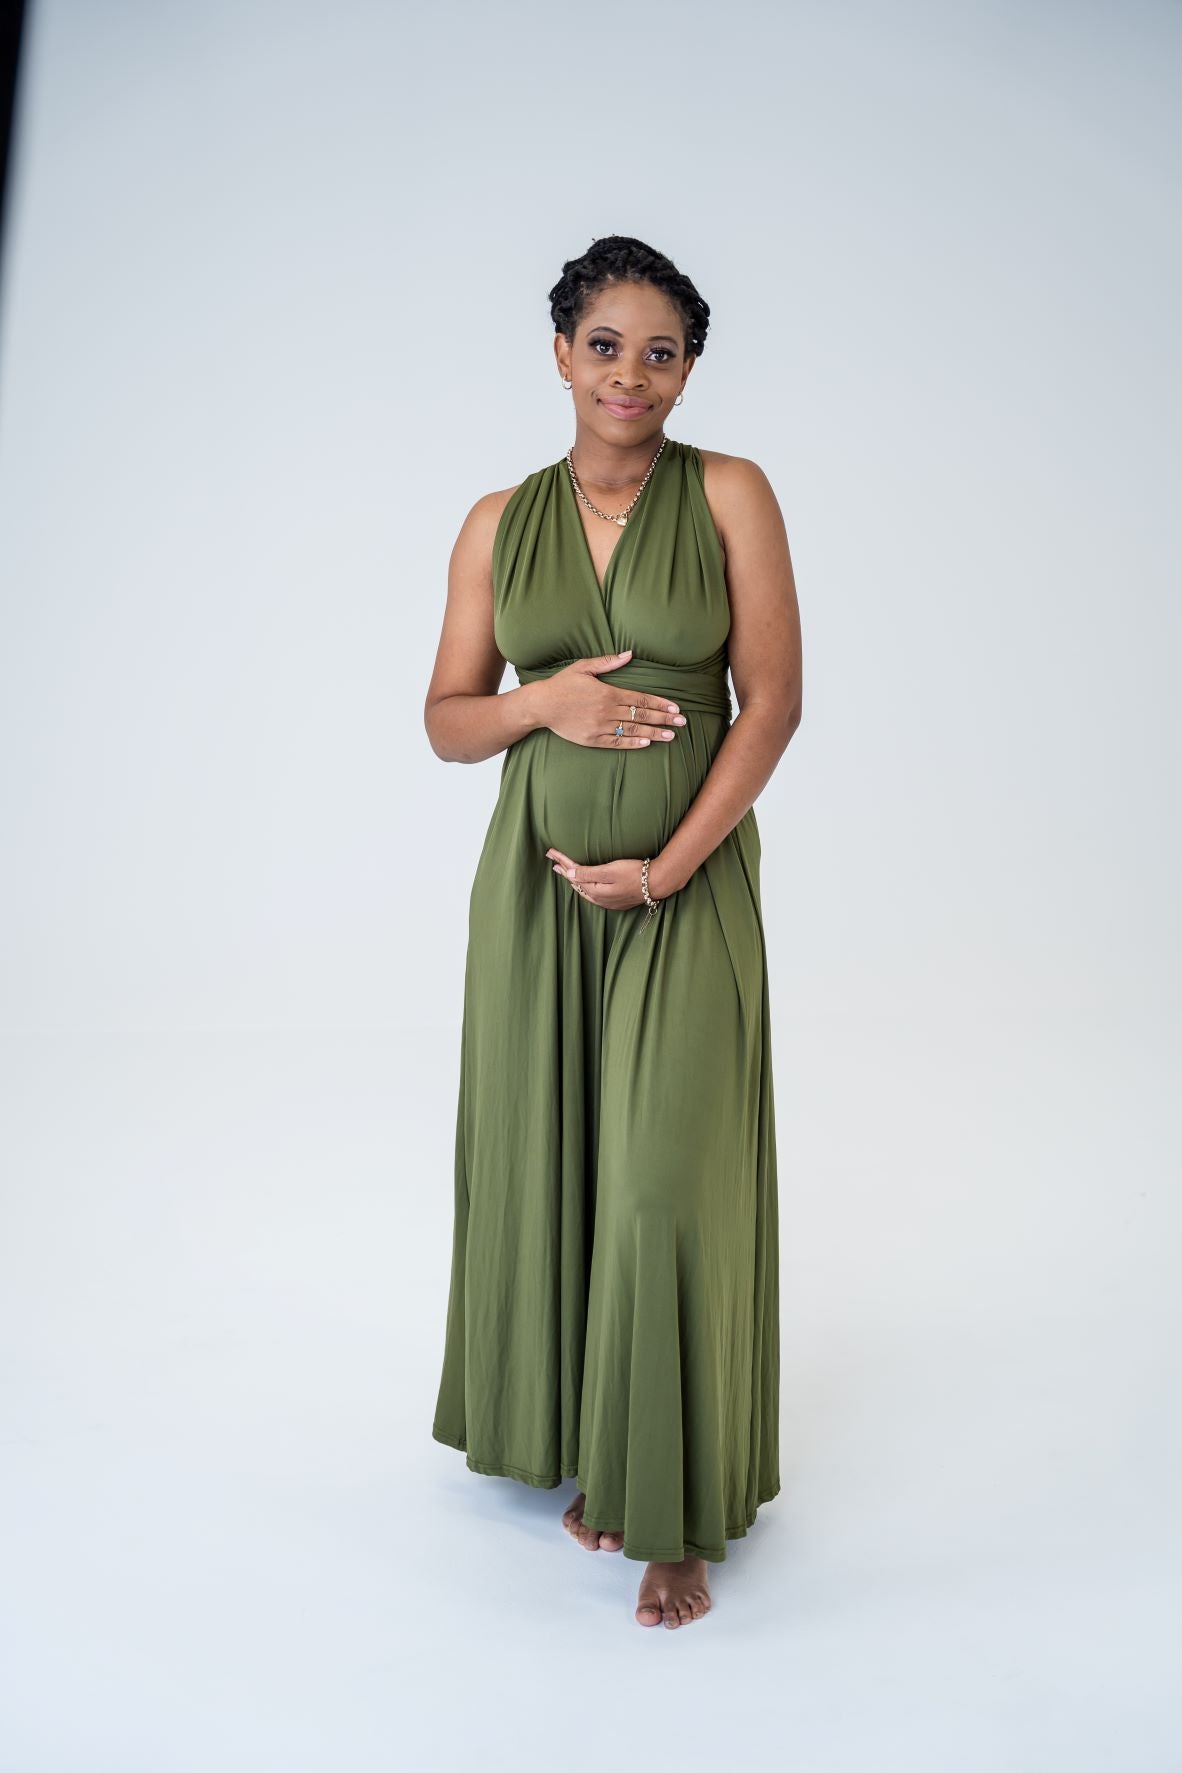 Maternity Photoshoot Dresses - Flexy - Army Green Dress - 4 DAY RENTAL - Luxe Bumps AU